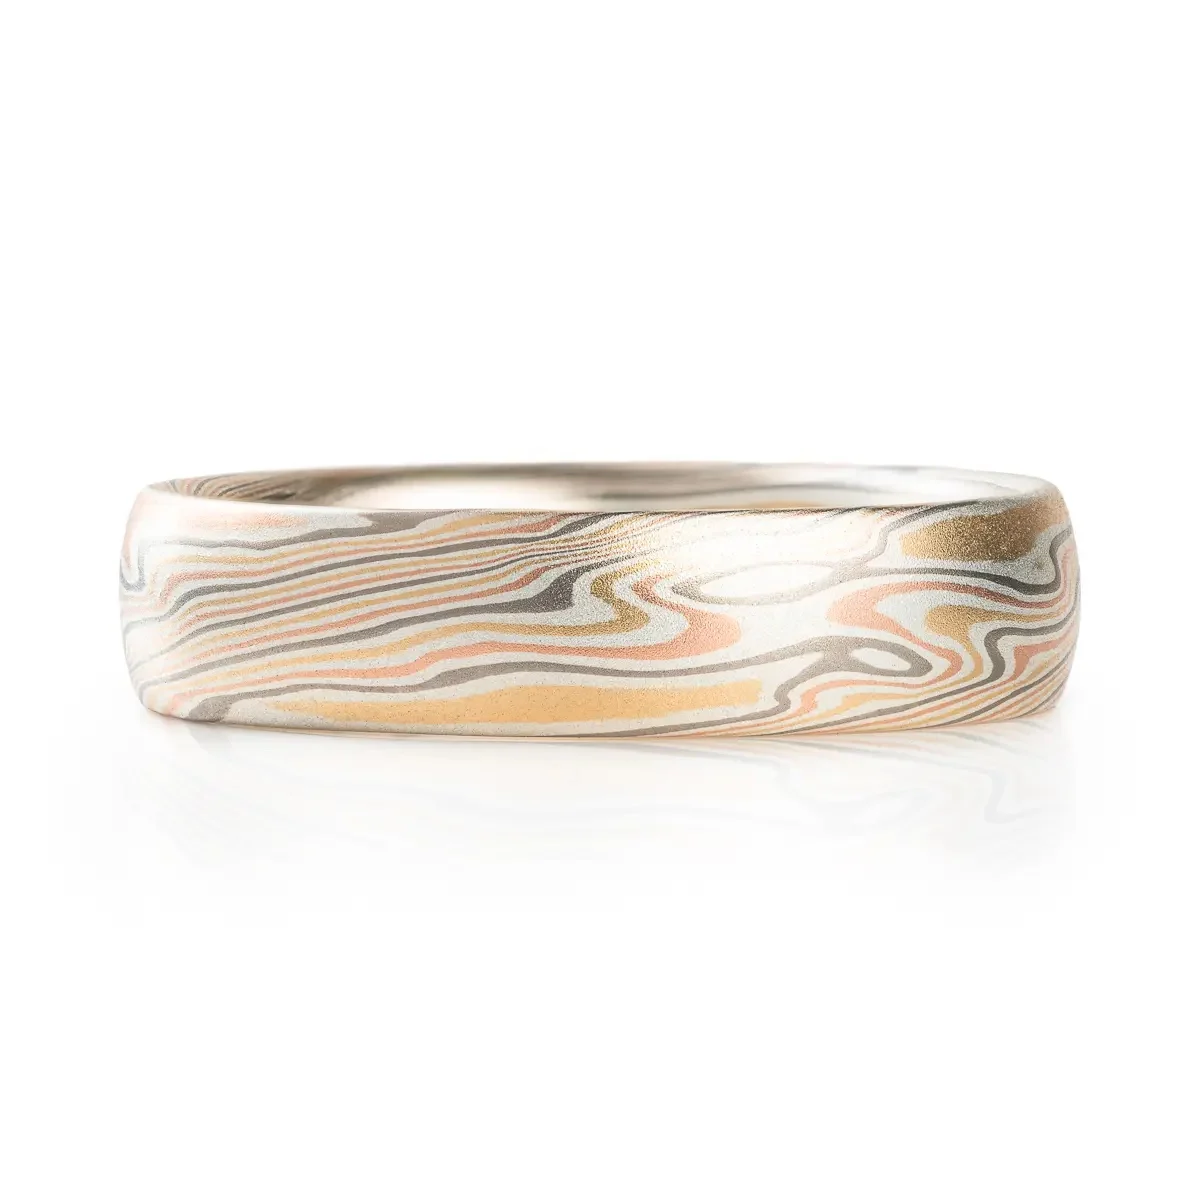 light colored mokume gane band, 5mm wide in a twist pattern